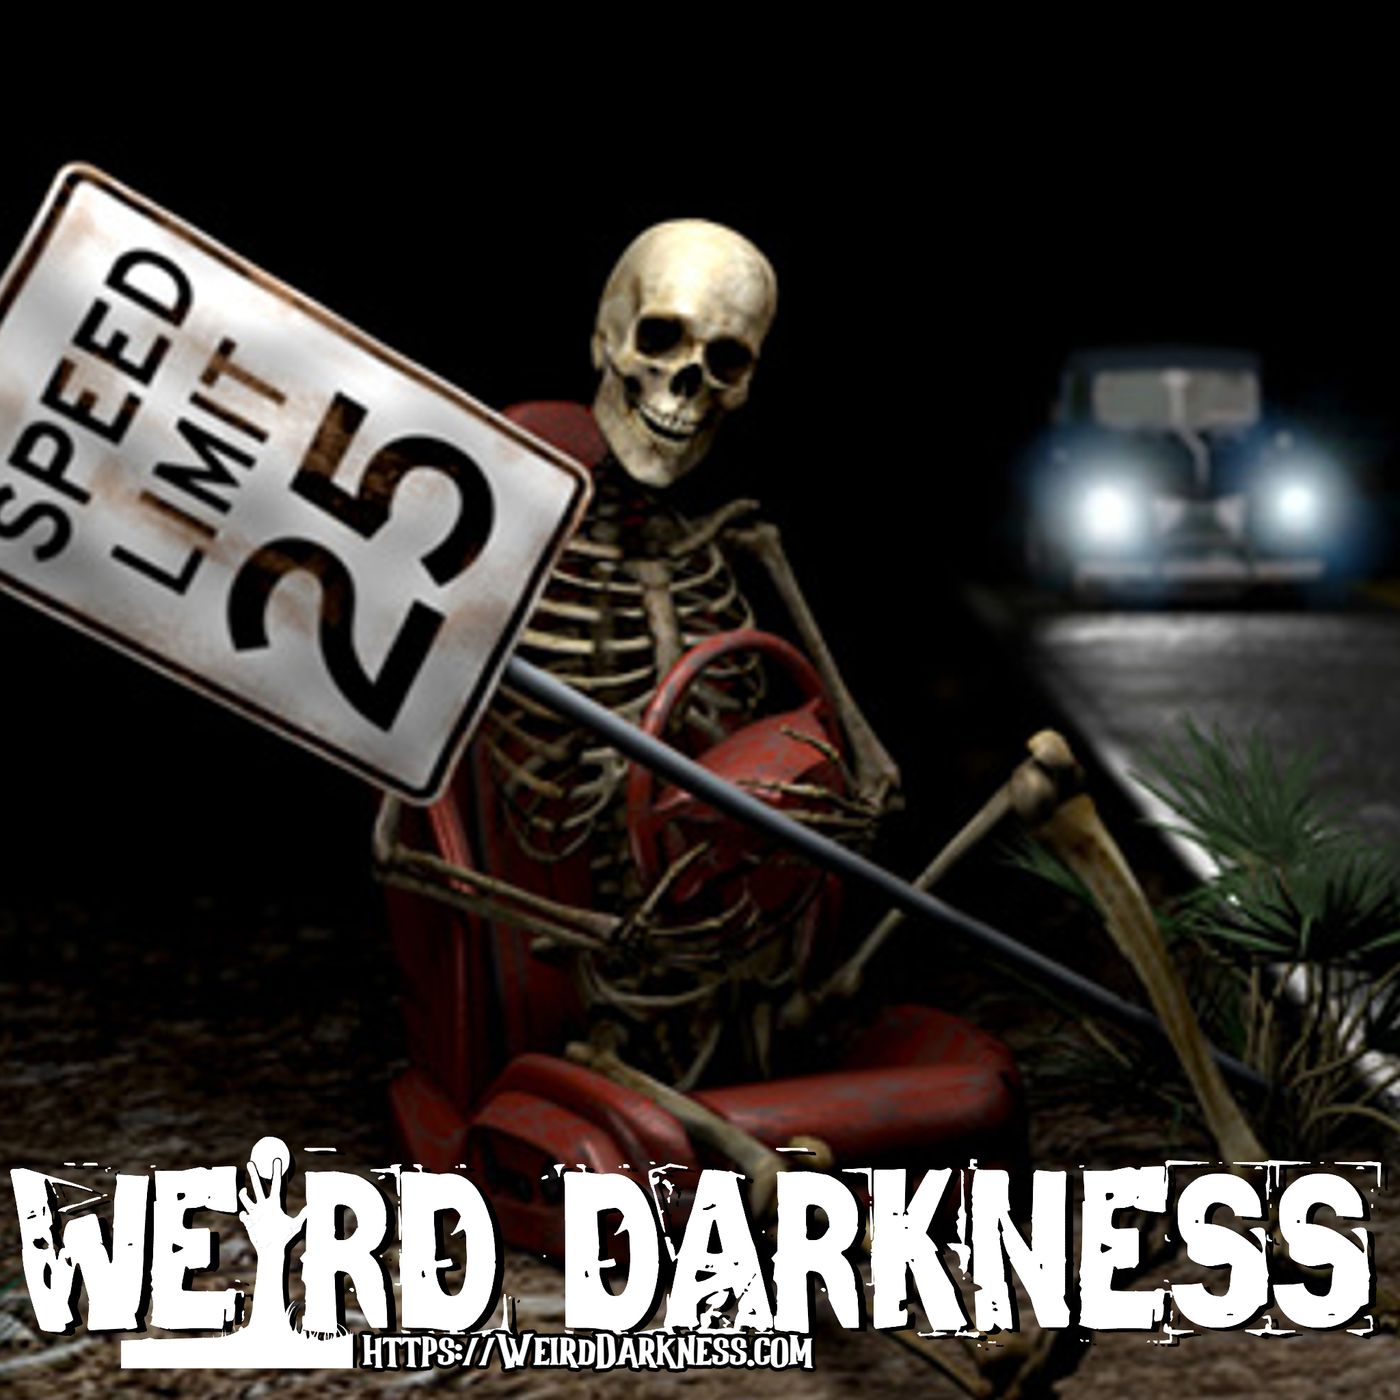 “THE MOST HAUNTED ROADS IN AMERICA” and More Dark and Disturbing True Stories! #WeirdDarkness